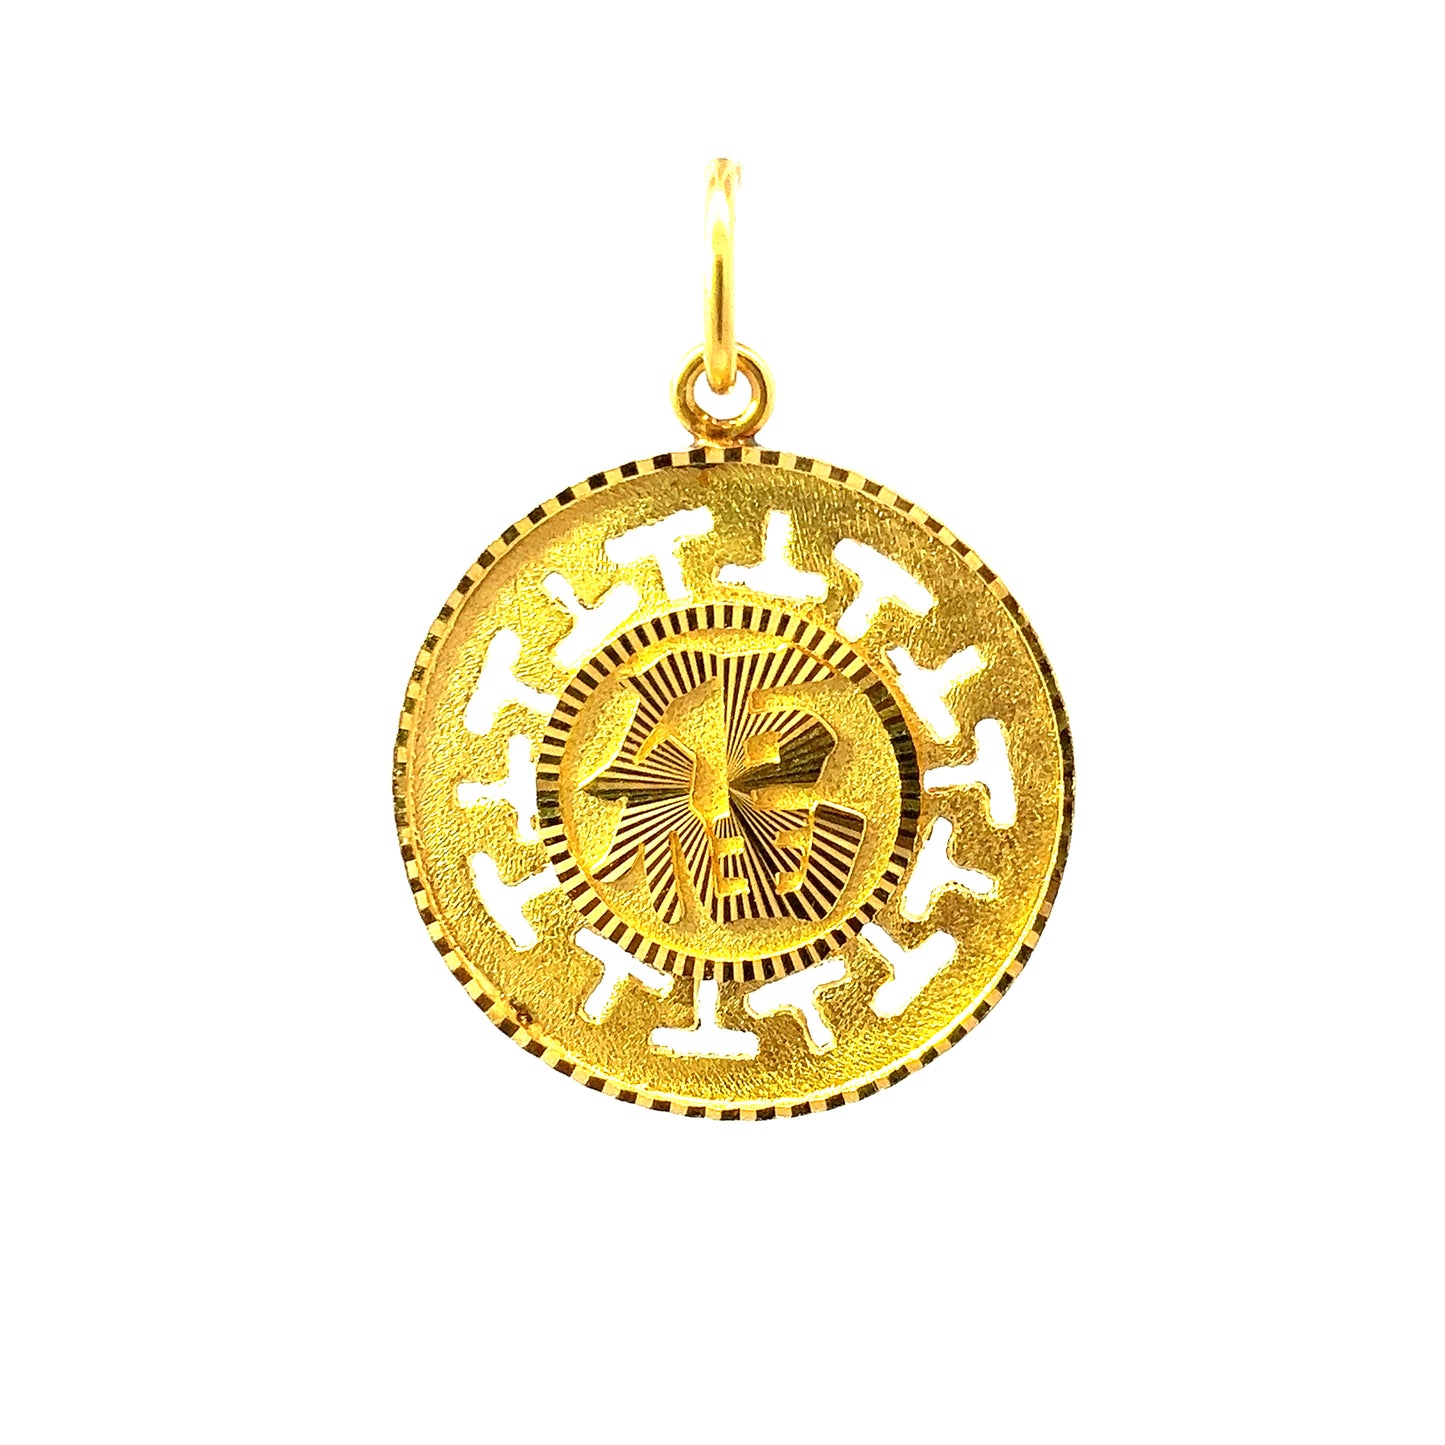 GOLD PENDANT ( 22K ) ( 4.3g ) - 0010792 Chain sold separately